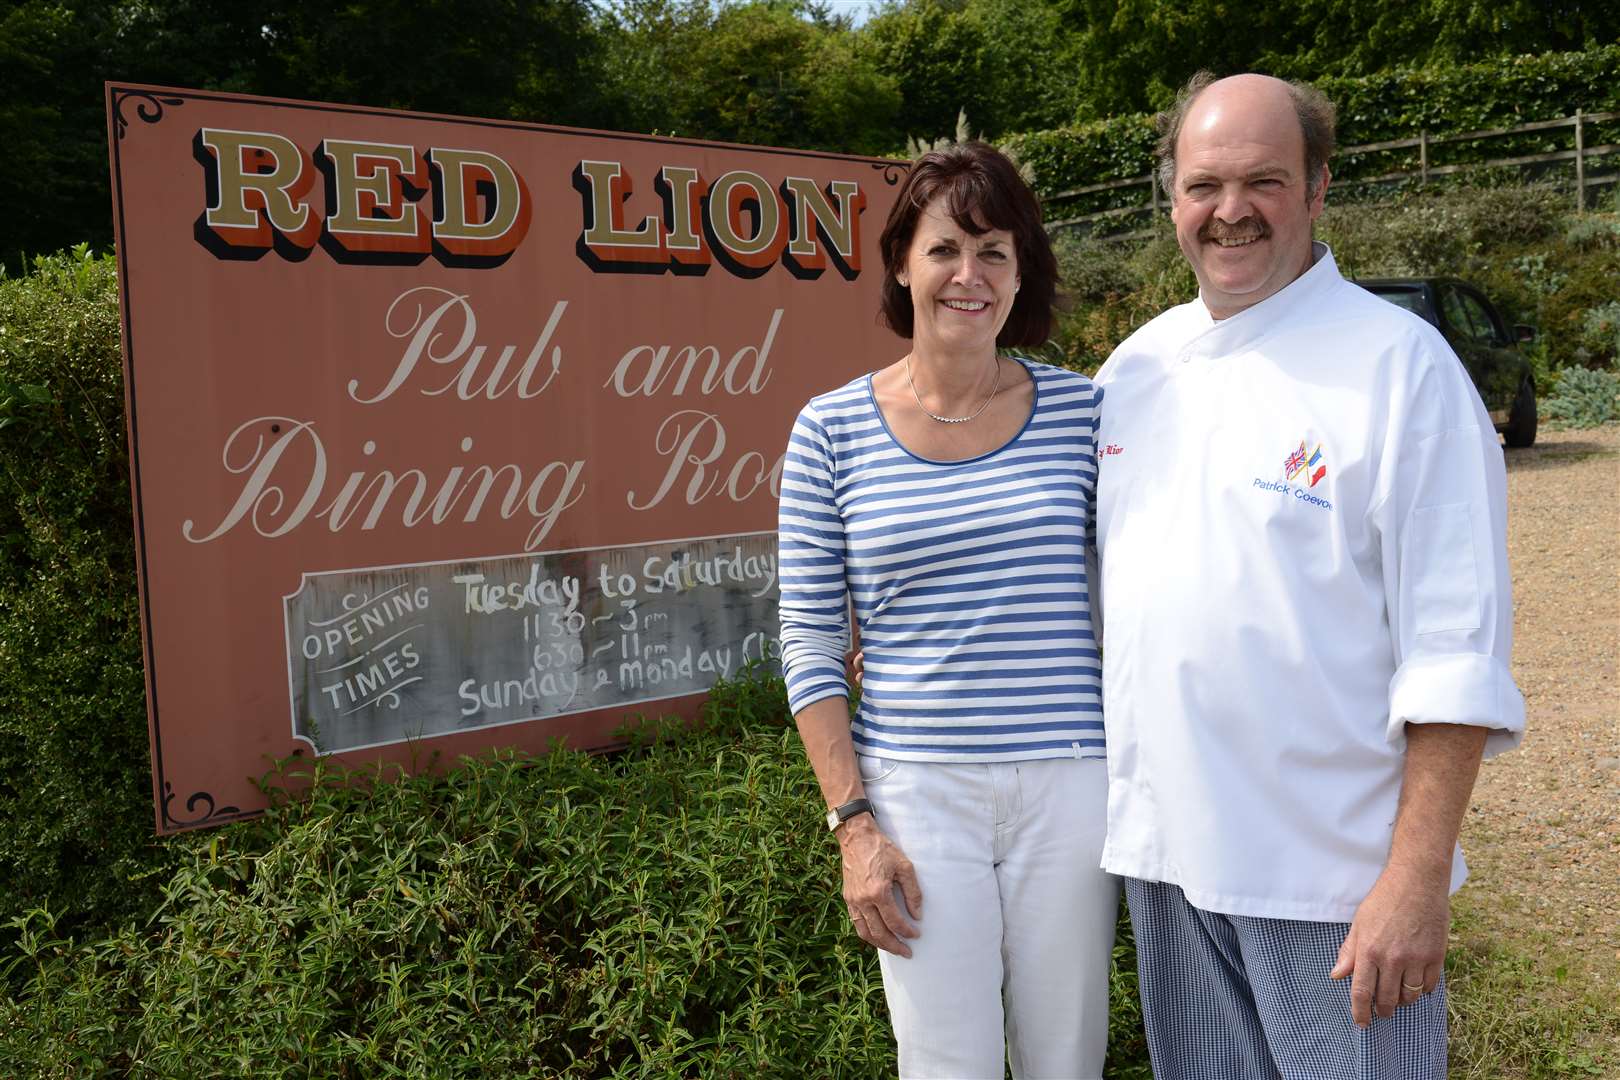 Jo and Patrick Coevoet are the owners of The Red Lion Pub in Milstead